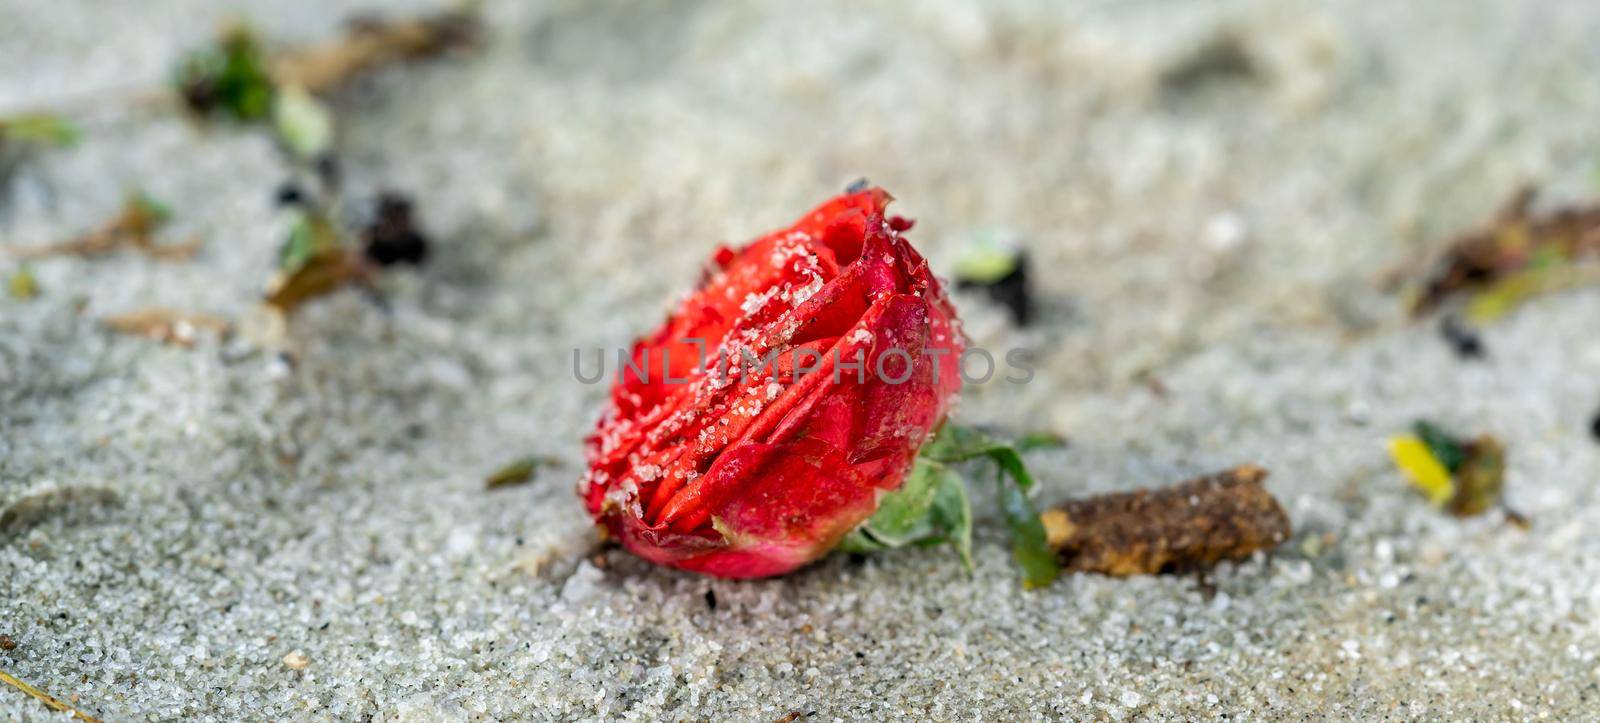 Red rose on the beach with the sand. Macro shot of red rose on beach covered with sand by billroque